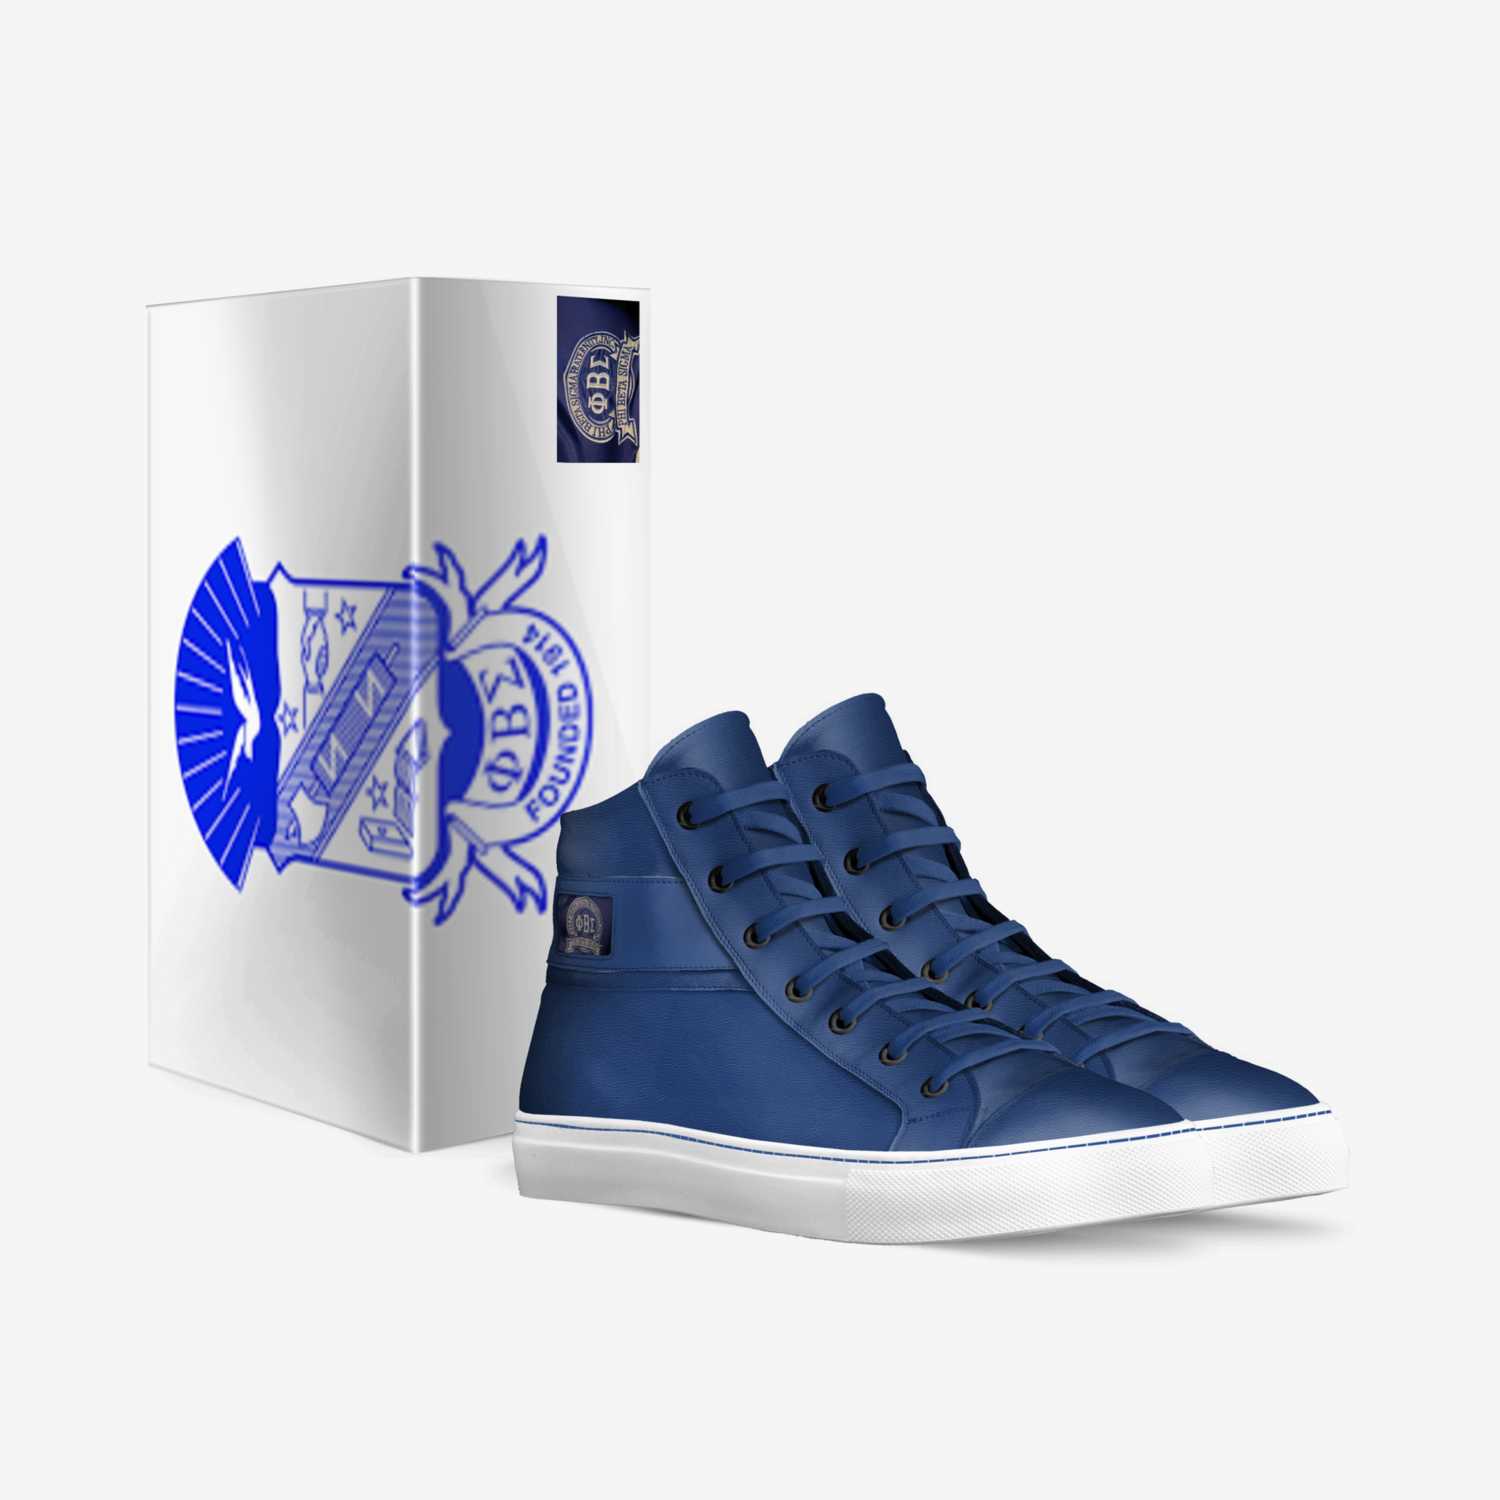 Phi Beta Sigma custom made in Italy shoes by Emery Bobo Sr | Box view